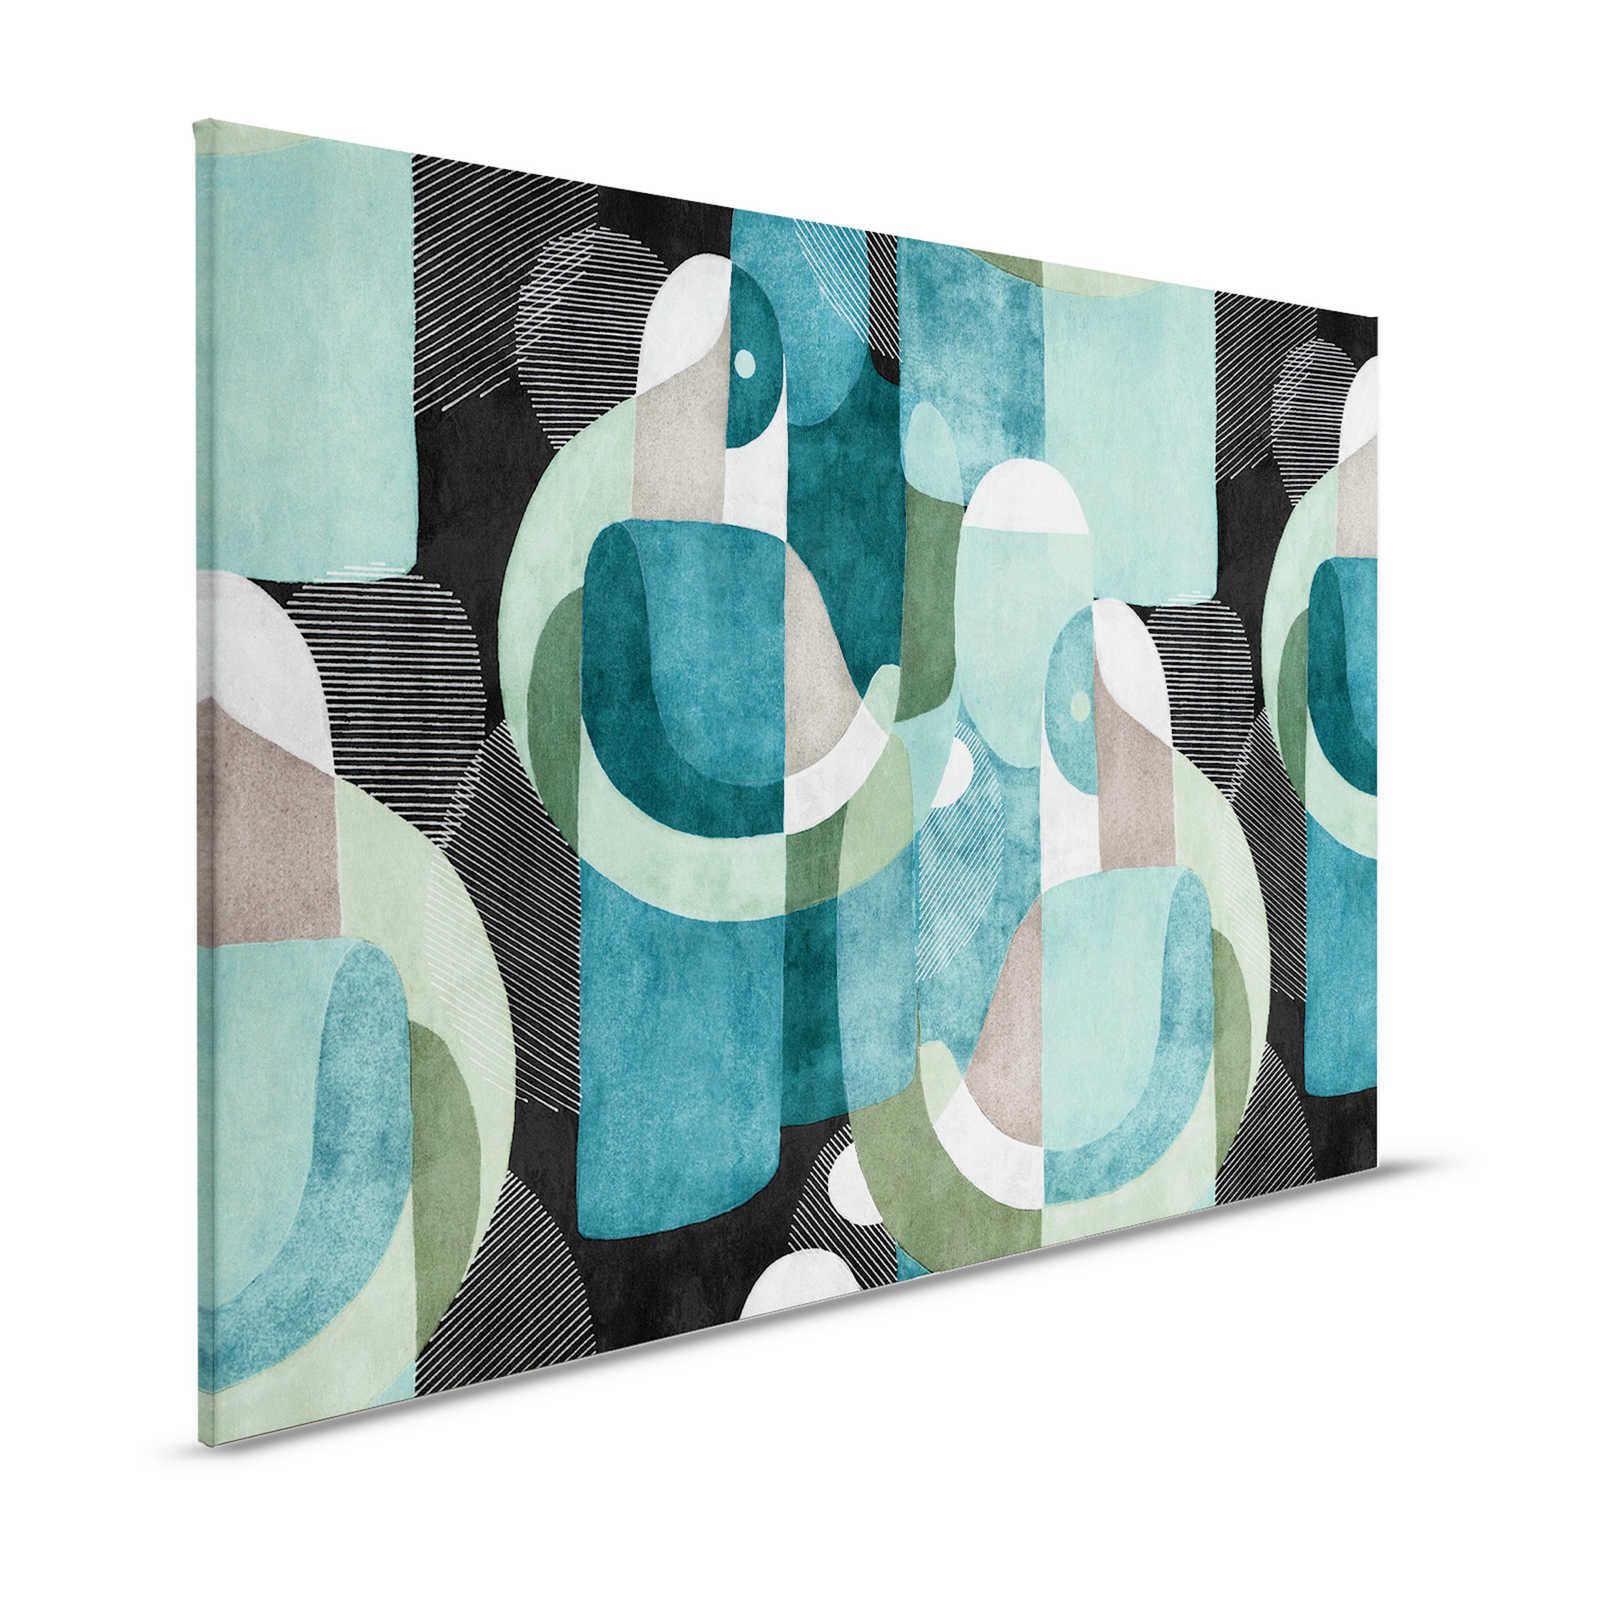 Meeting Place 1 - Canvas painting abstract ethno design in black & green - 1,20 m x 0,80 m
